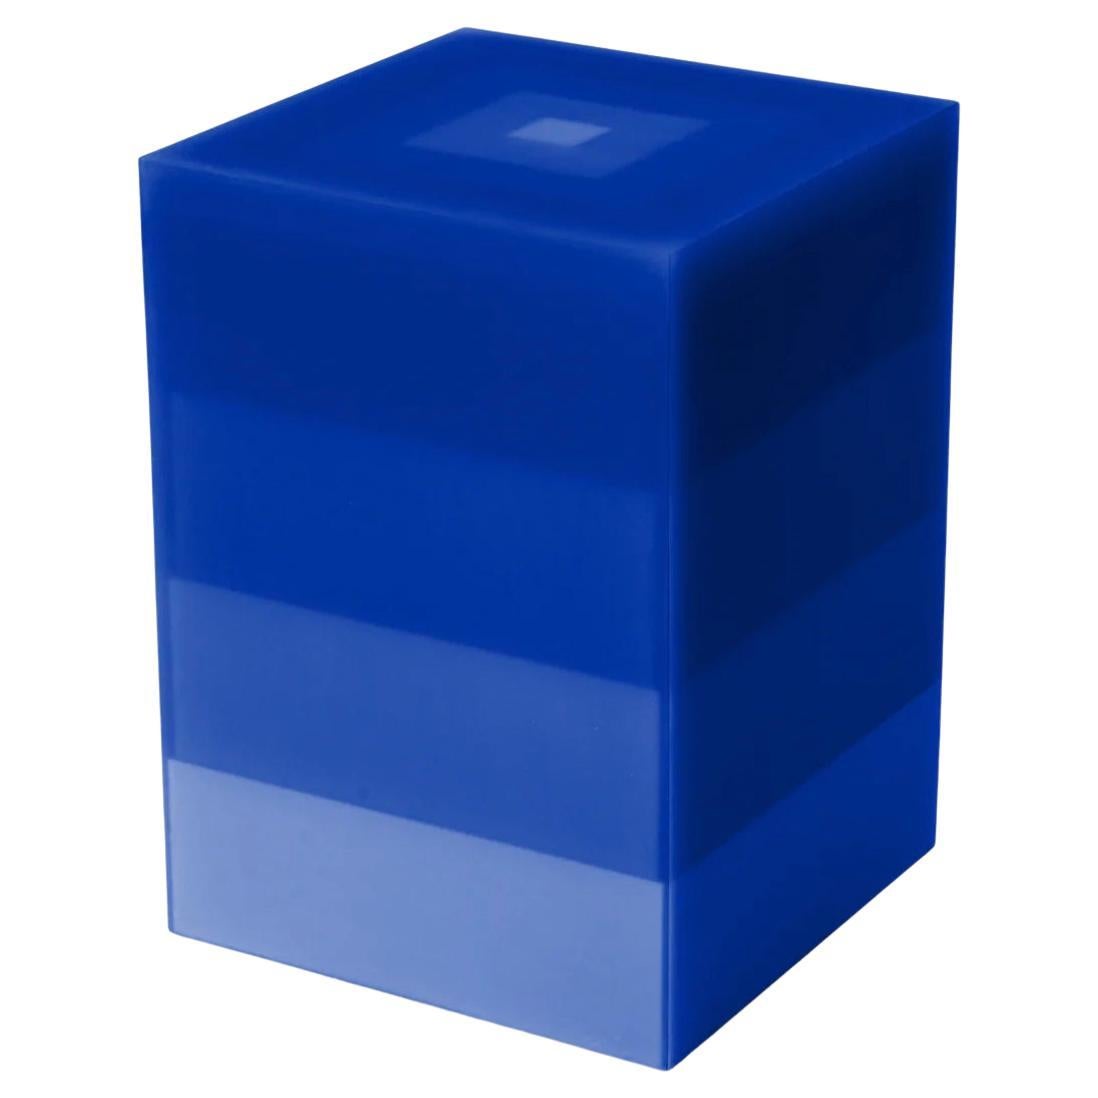 Scale Pyramid Resin Side Table/Stool in Blue by Facture, REP by Tuleste Factory For Sale